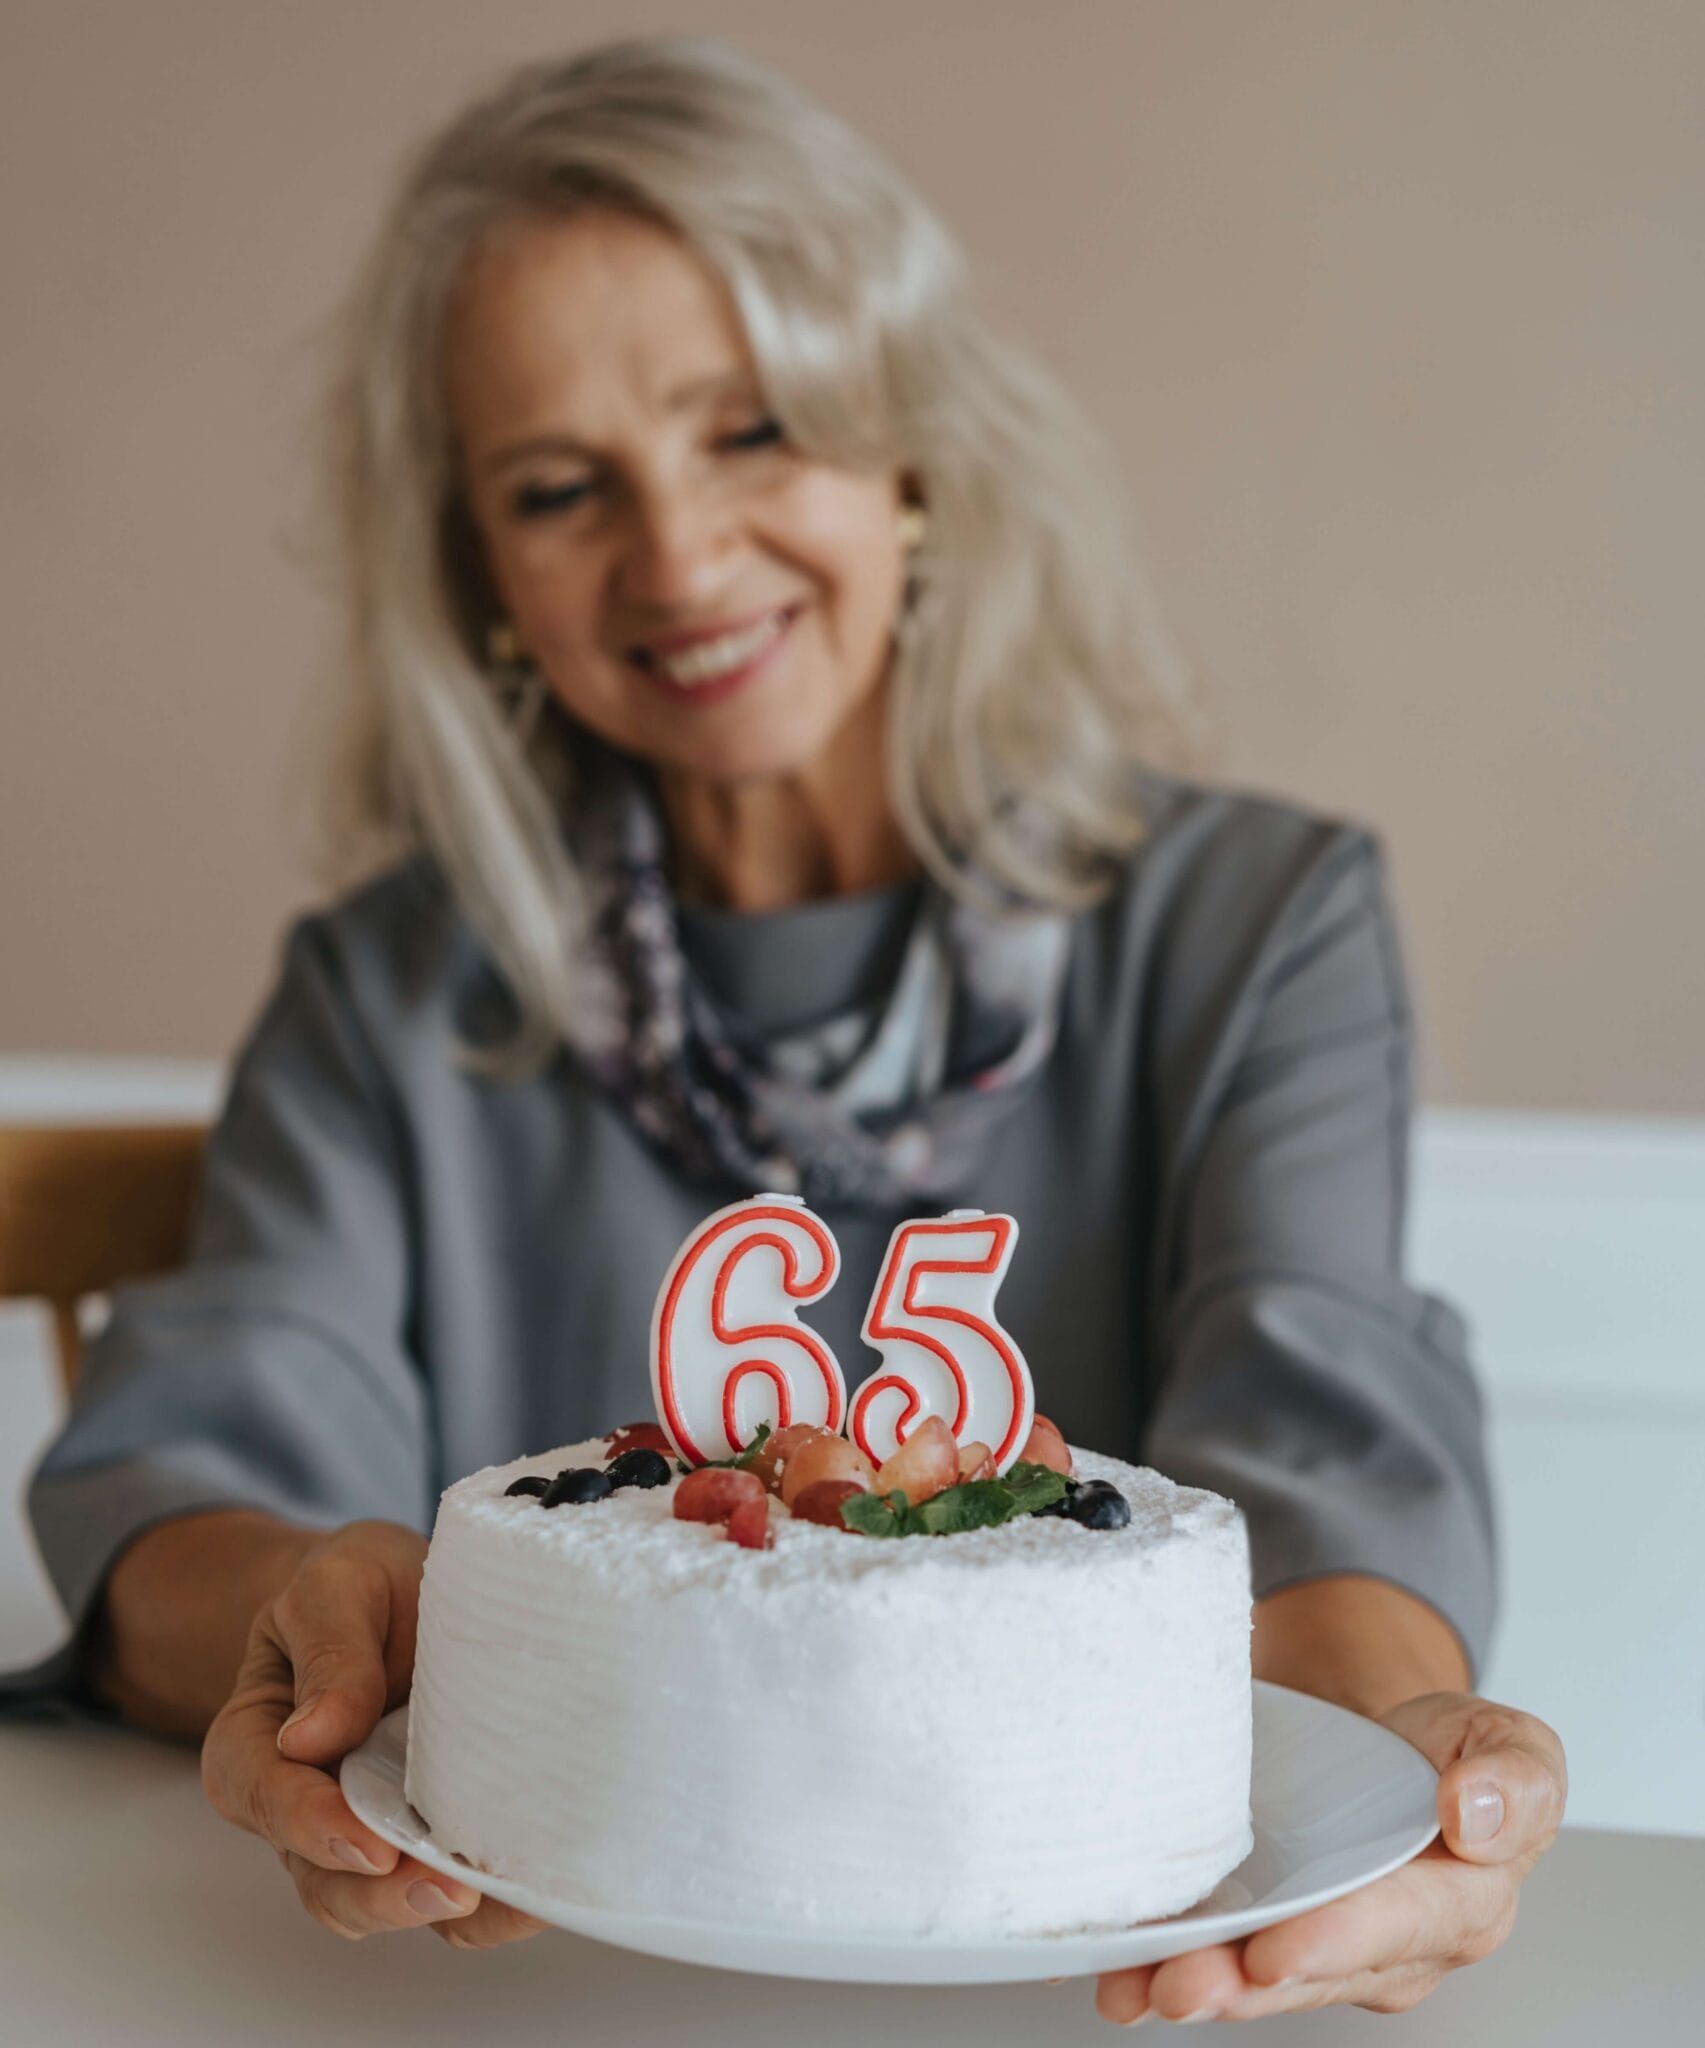 Birthdays and half birthdays critical to retirement planning and income